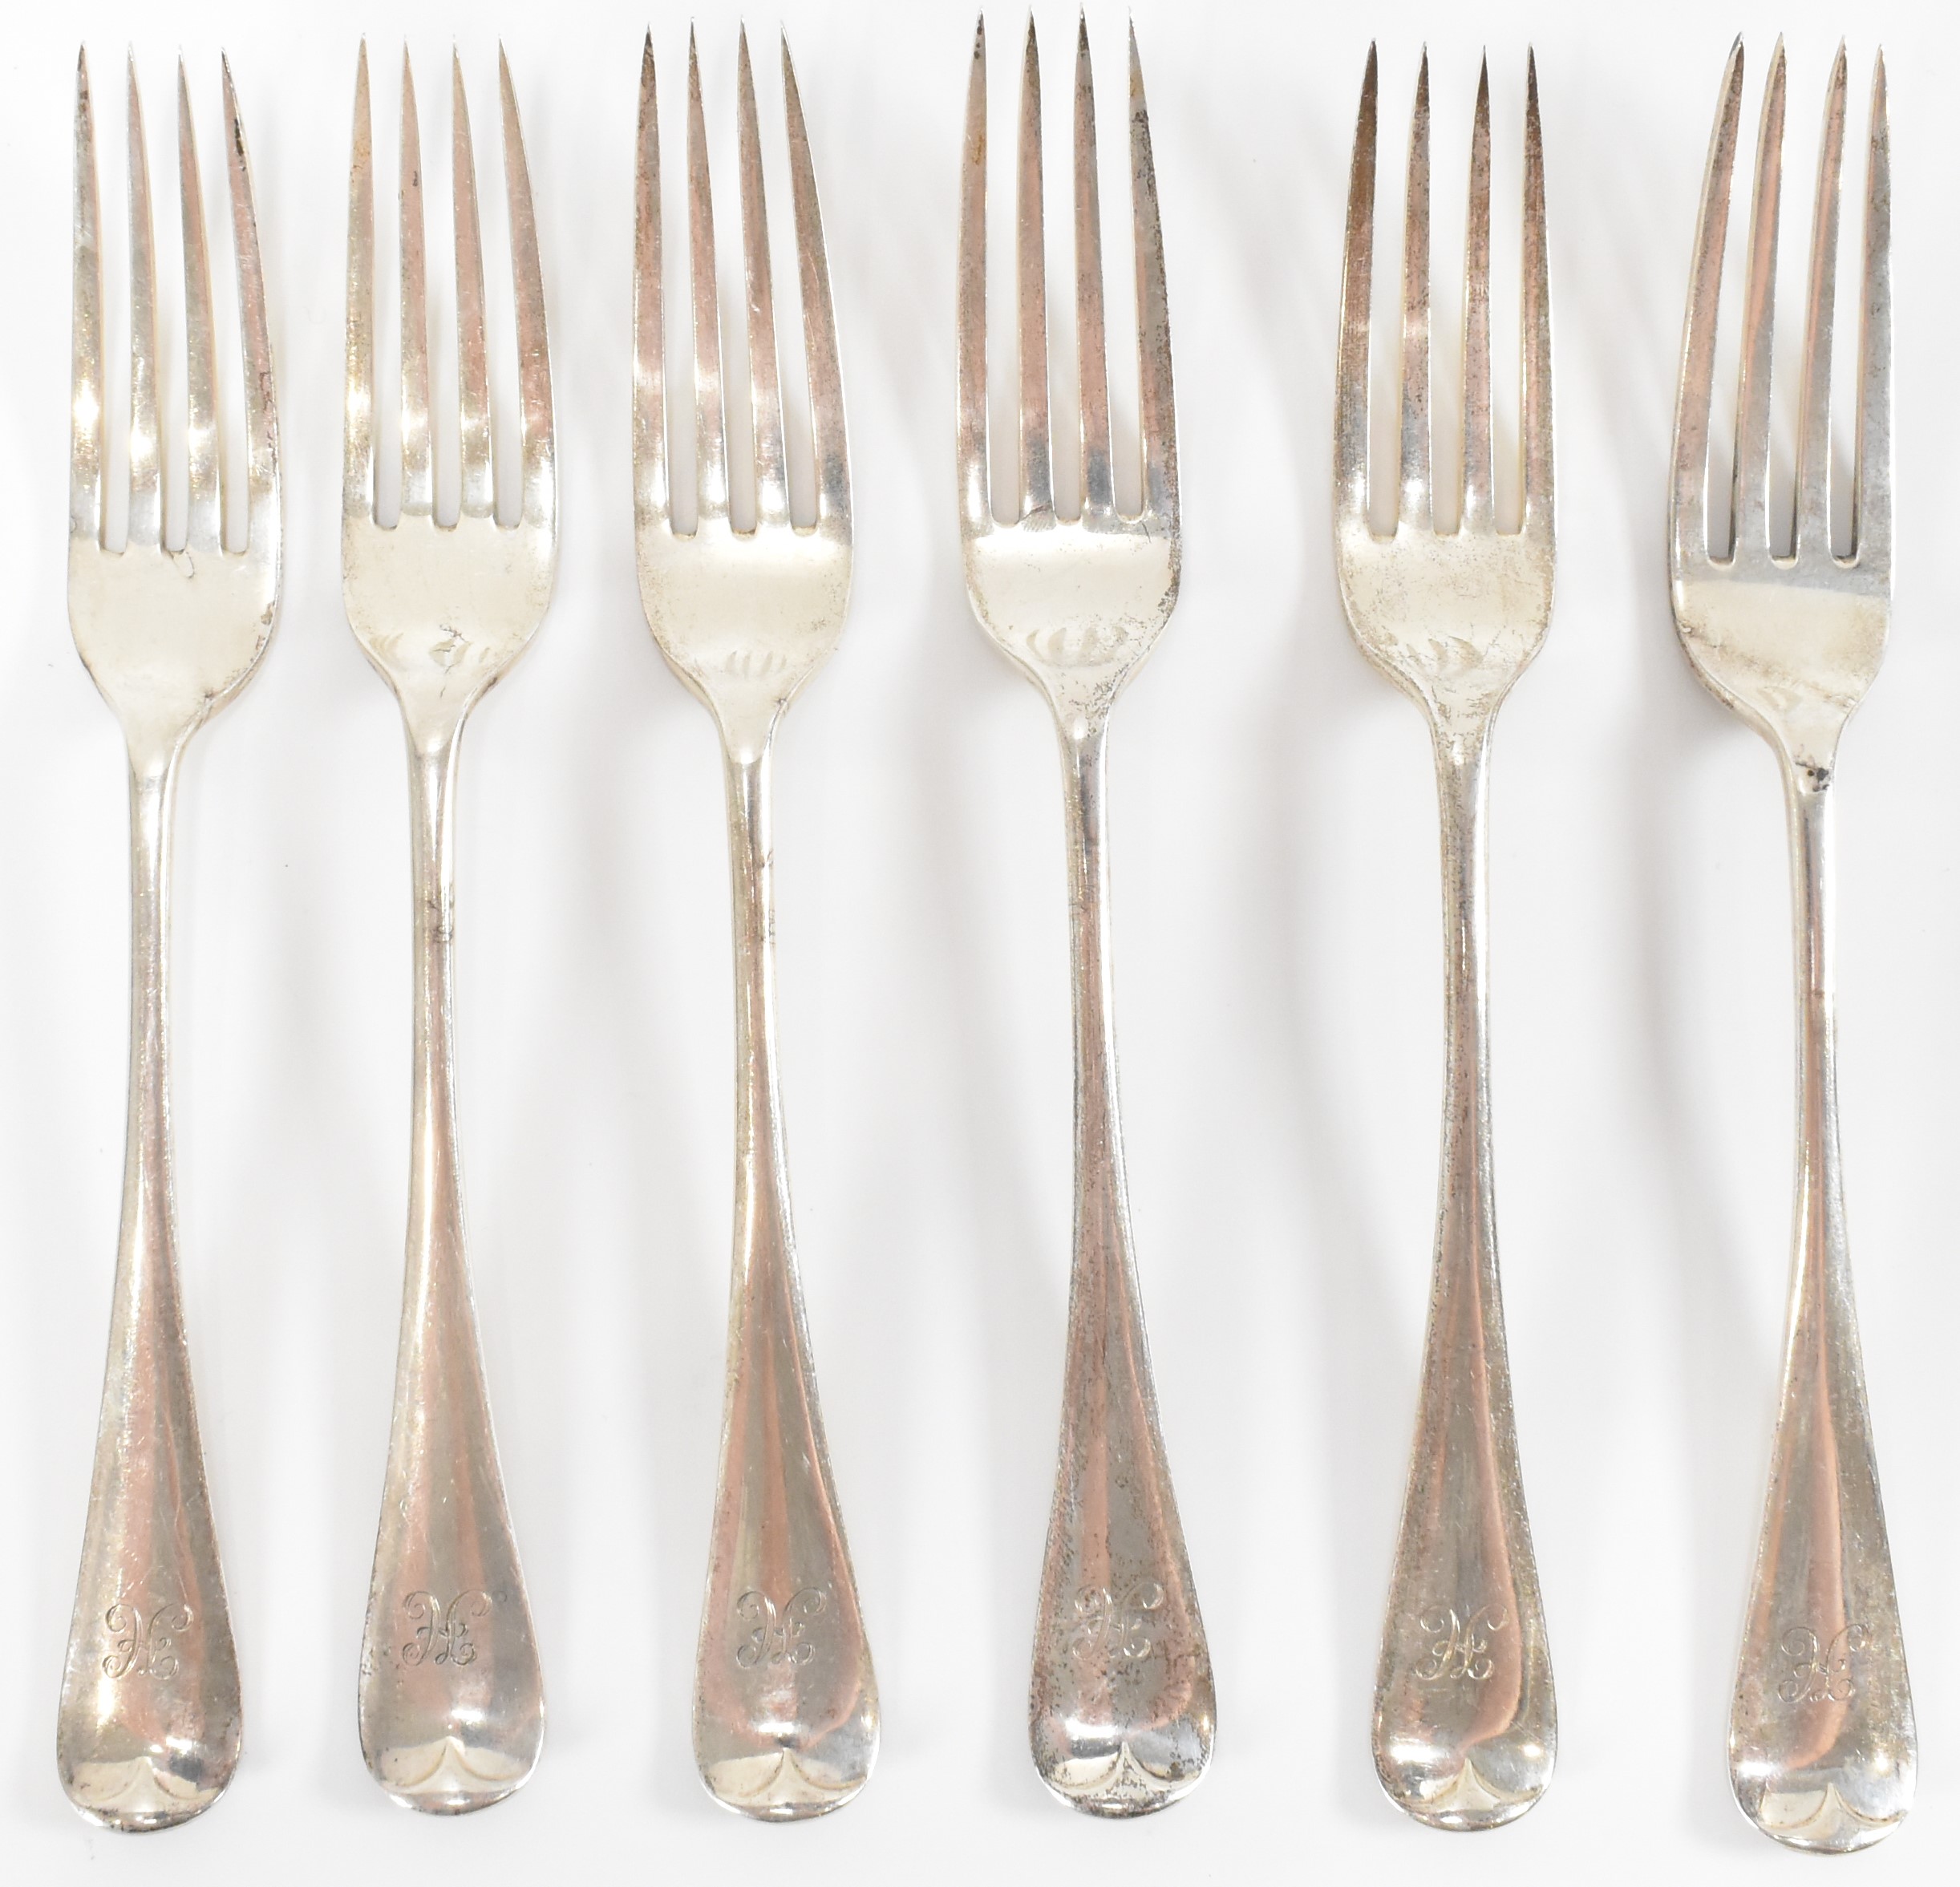 SIX SILVER VICTORIAN FORKS